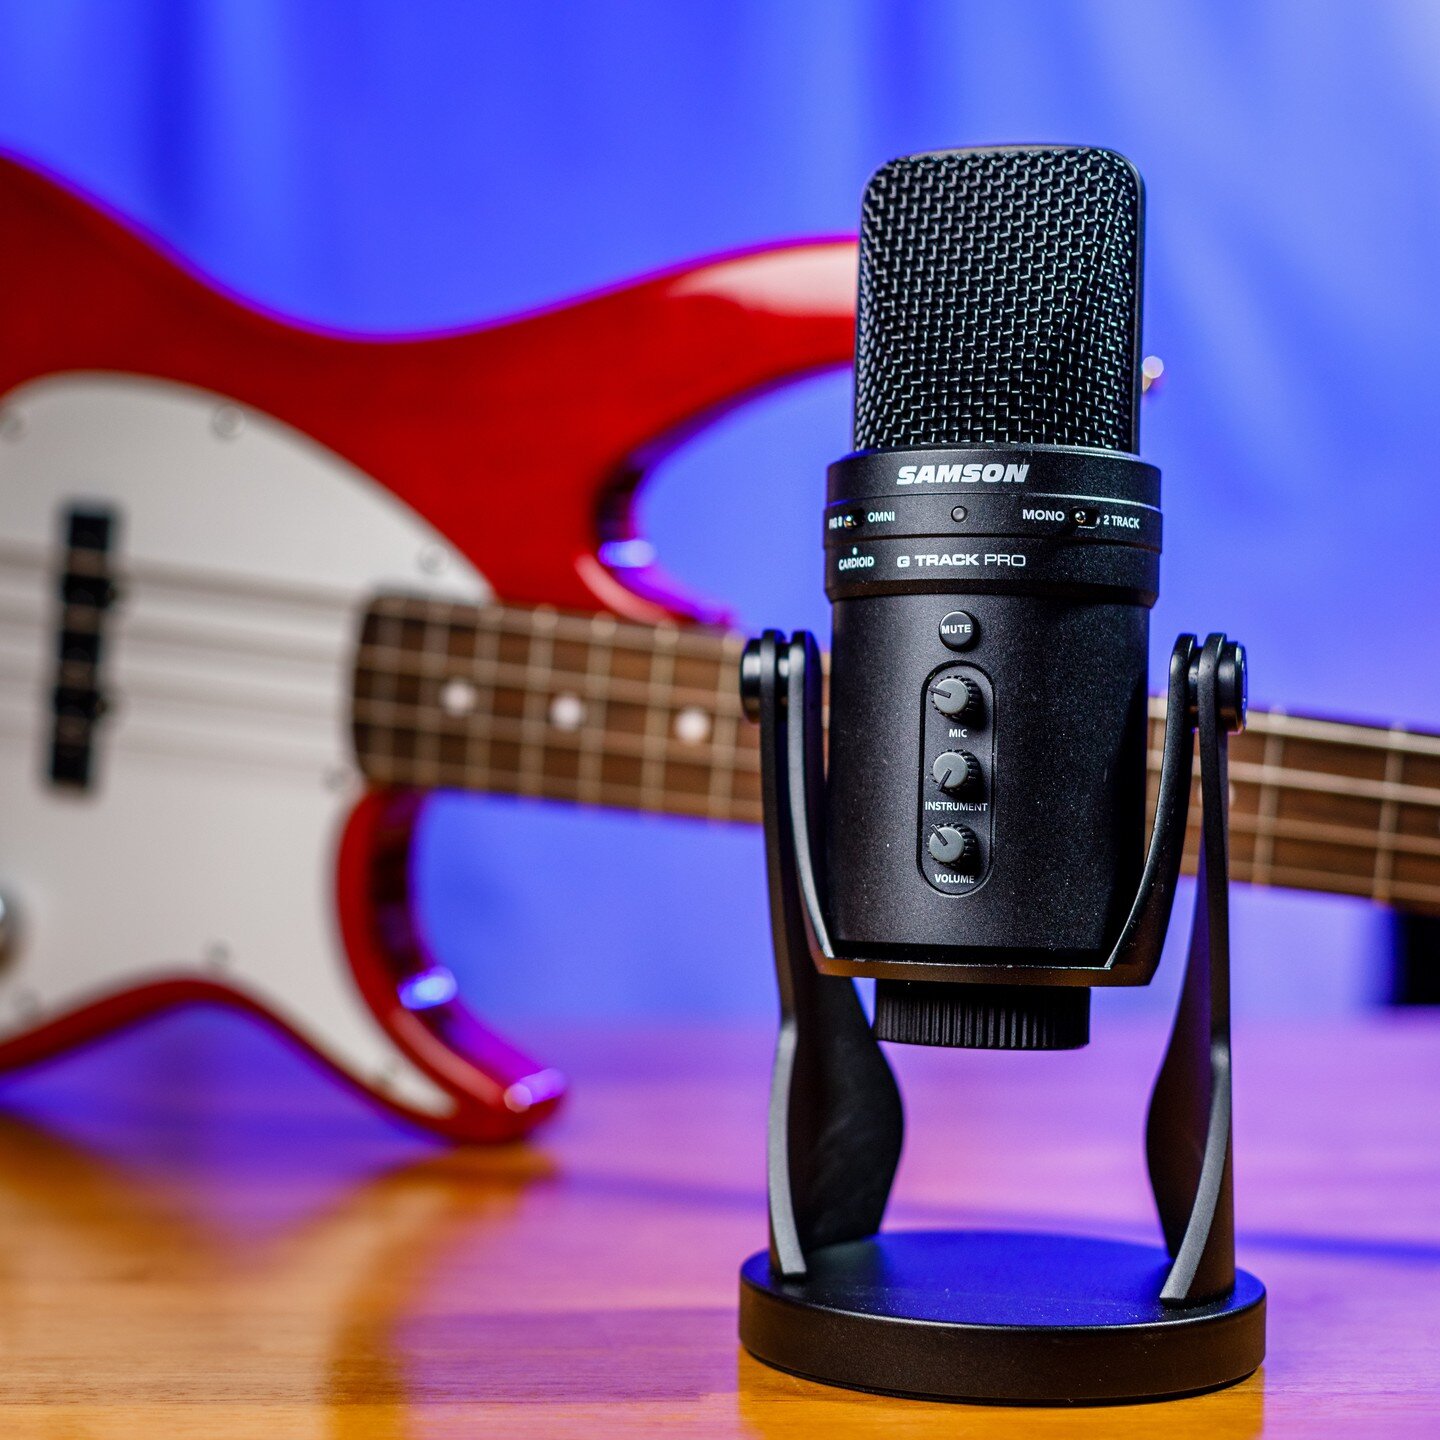 The awesome USB Microphone you've been looking for - the @samson_technologies G-Track Pro! Full review on my YouTube Channel, link in bio.

#gtrackpro #professionalusbmicrophone #microphonereview